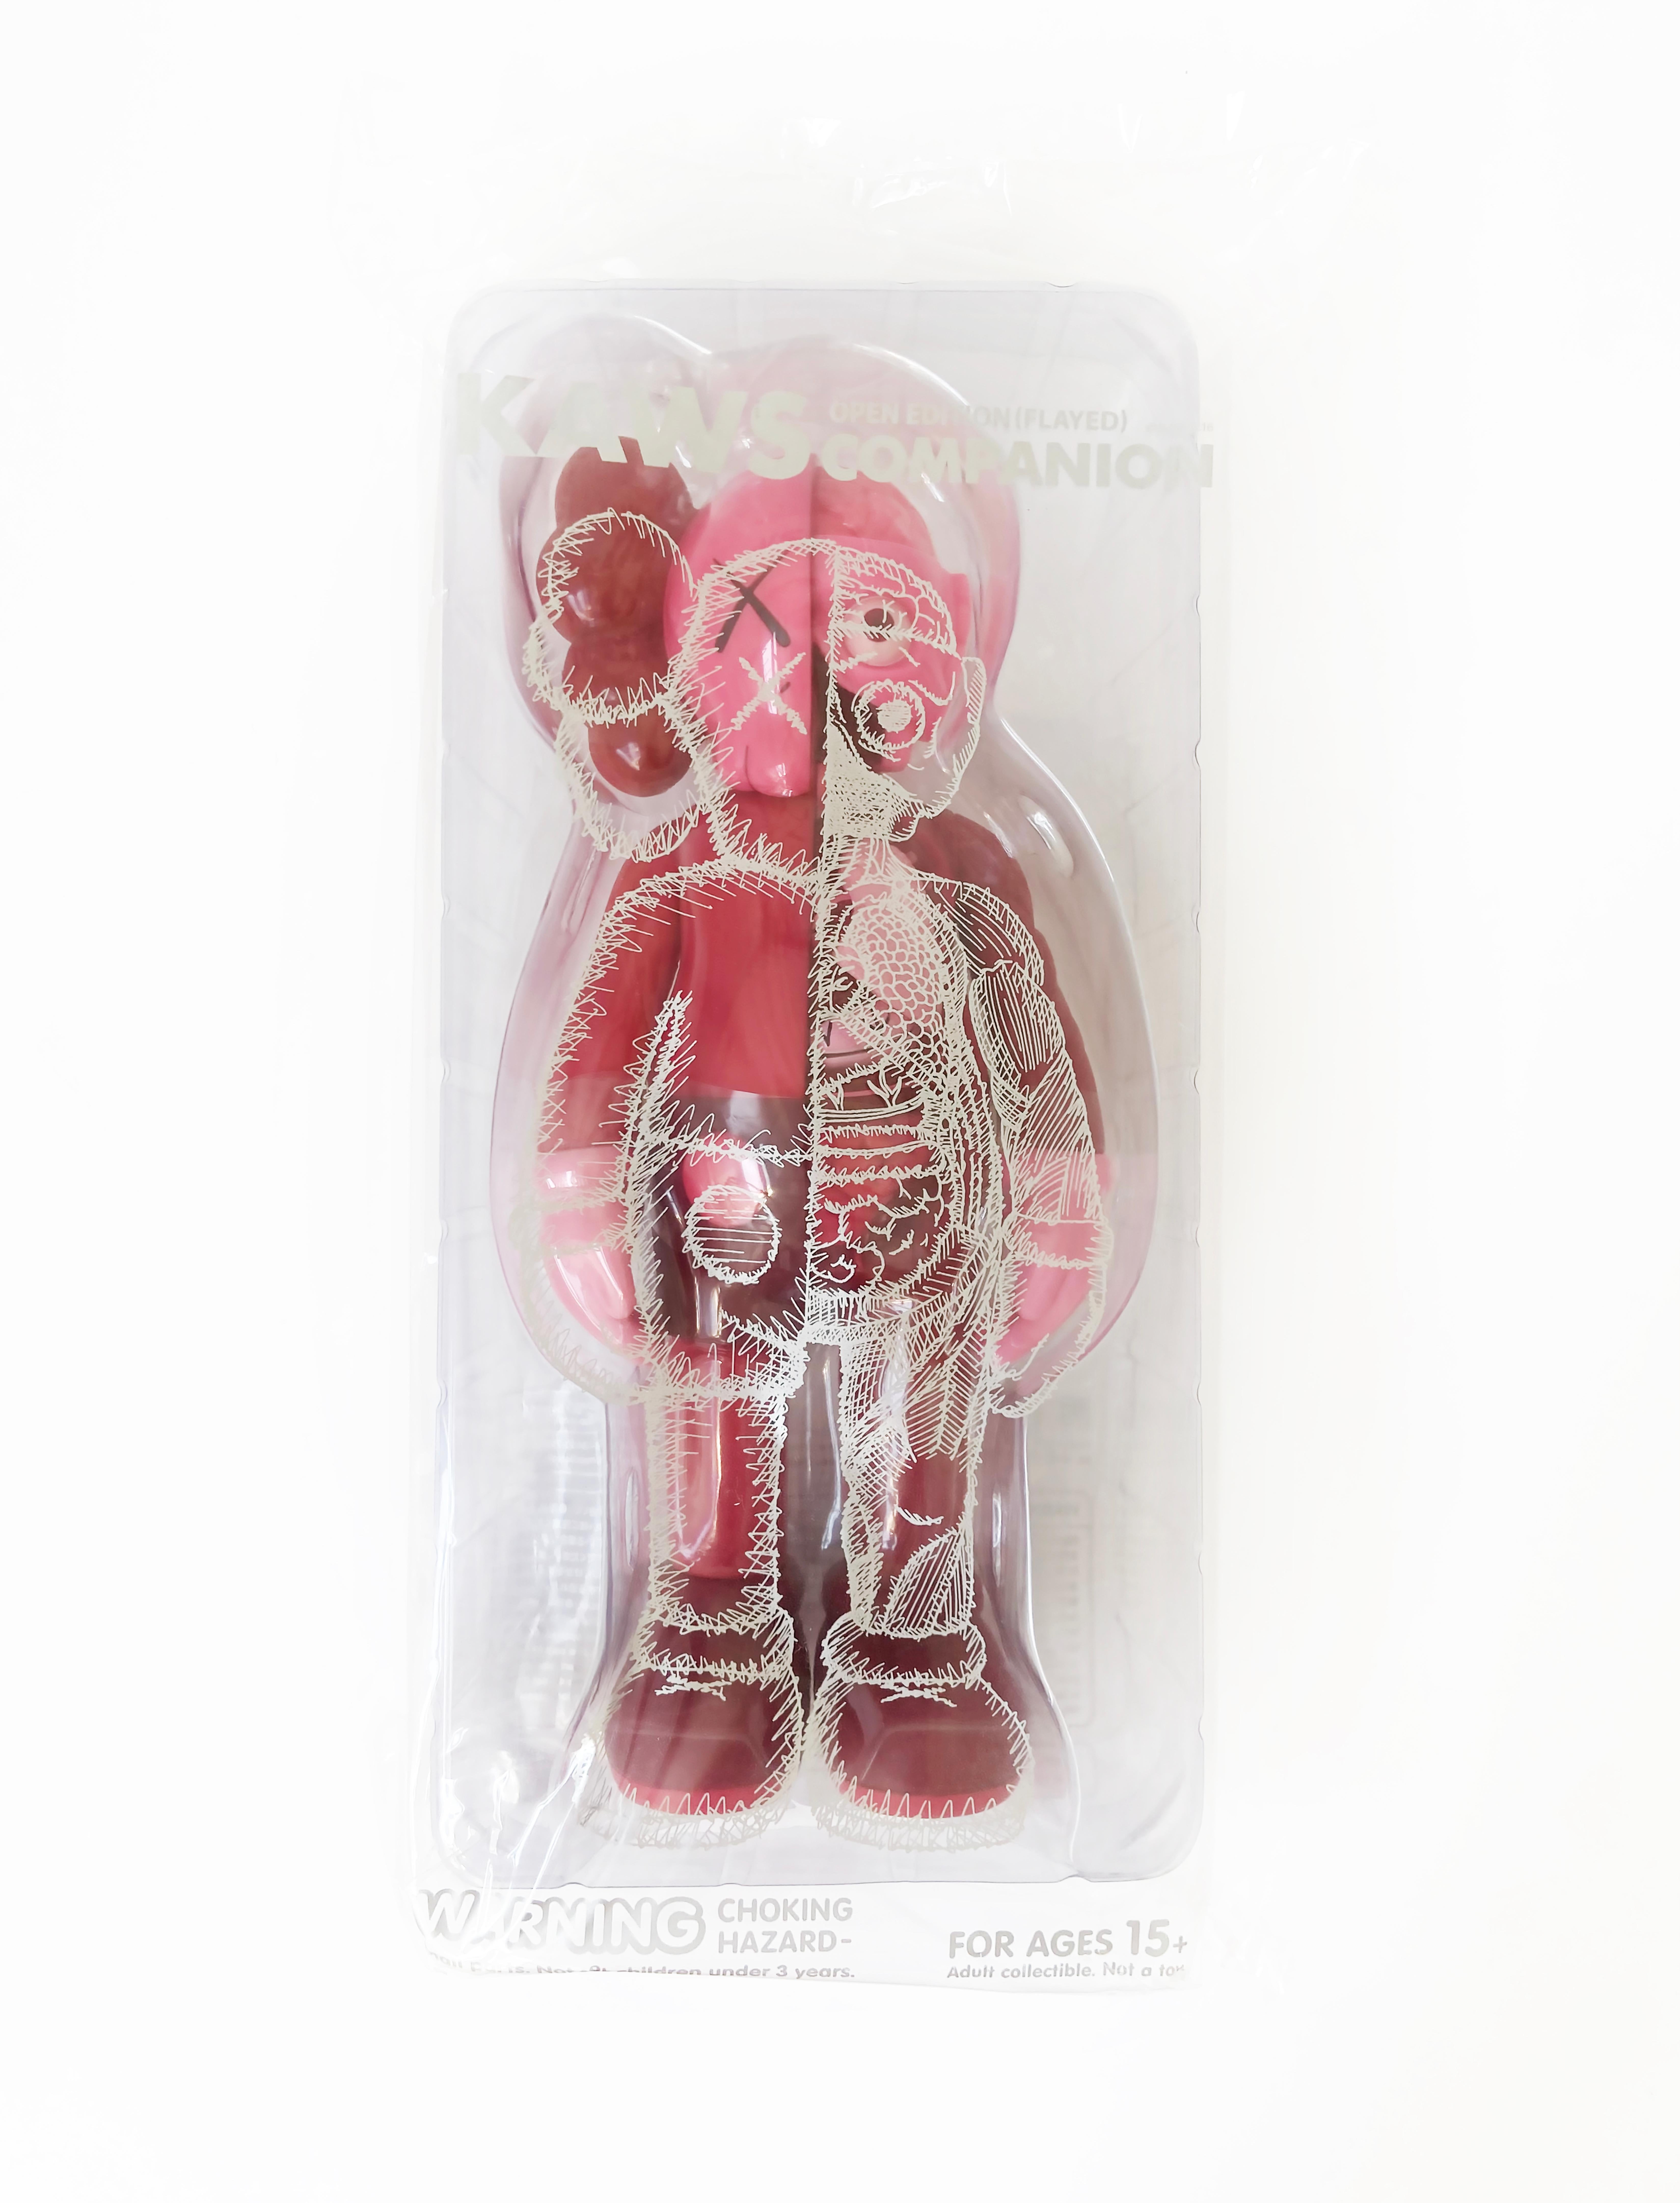 KAWS Blush Flayed Companion 2016: New and sealed in its original packaging. Published by Medicom Japan in conjunction with the exhibition, KAWS: Where The End Starts at the Modern Art Museum of Fort Worth. ThIs figurine has since sold out. 

Medium: